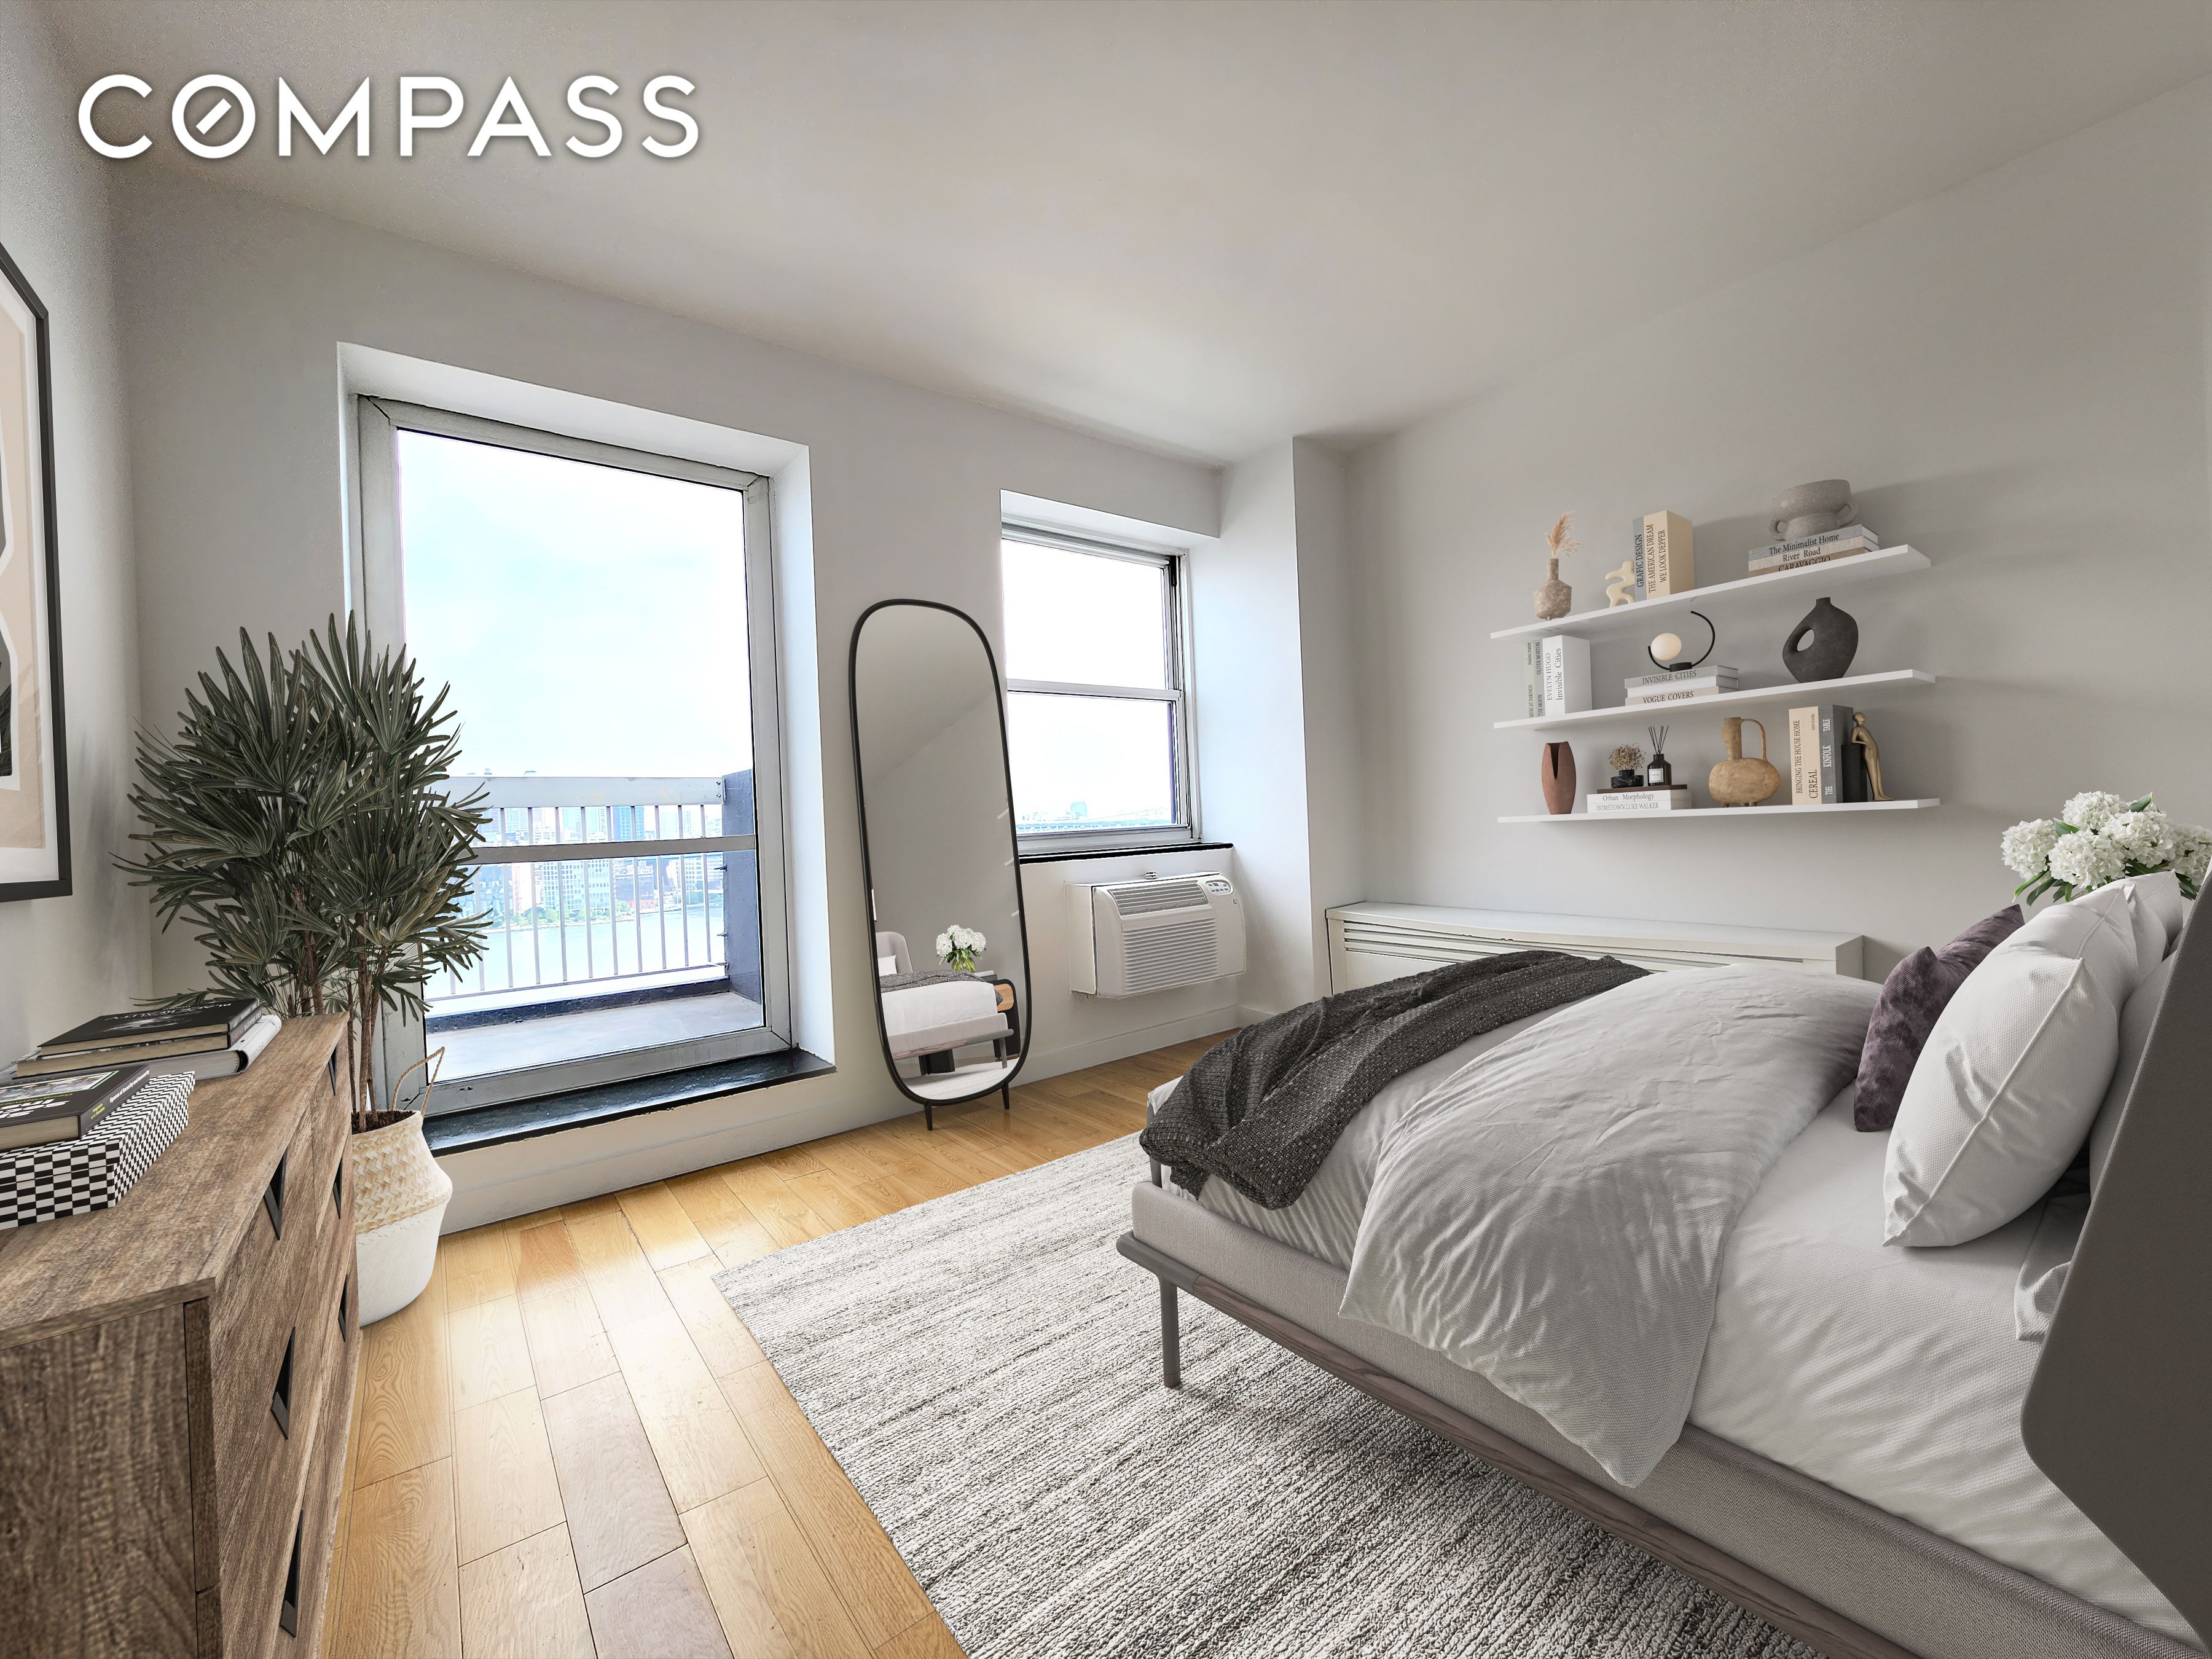 275 South Street 15Tt, Lower East Side, Downtown, NYC - 4 Bedrooms  
2 Bathrooms  
6 Rooms - 